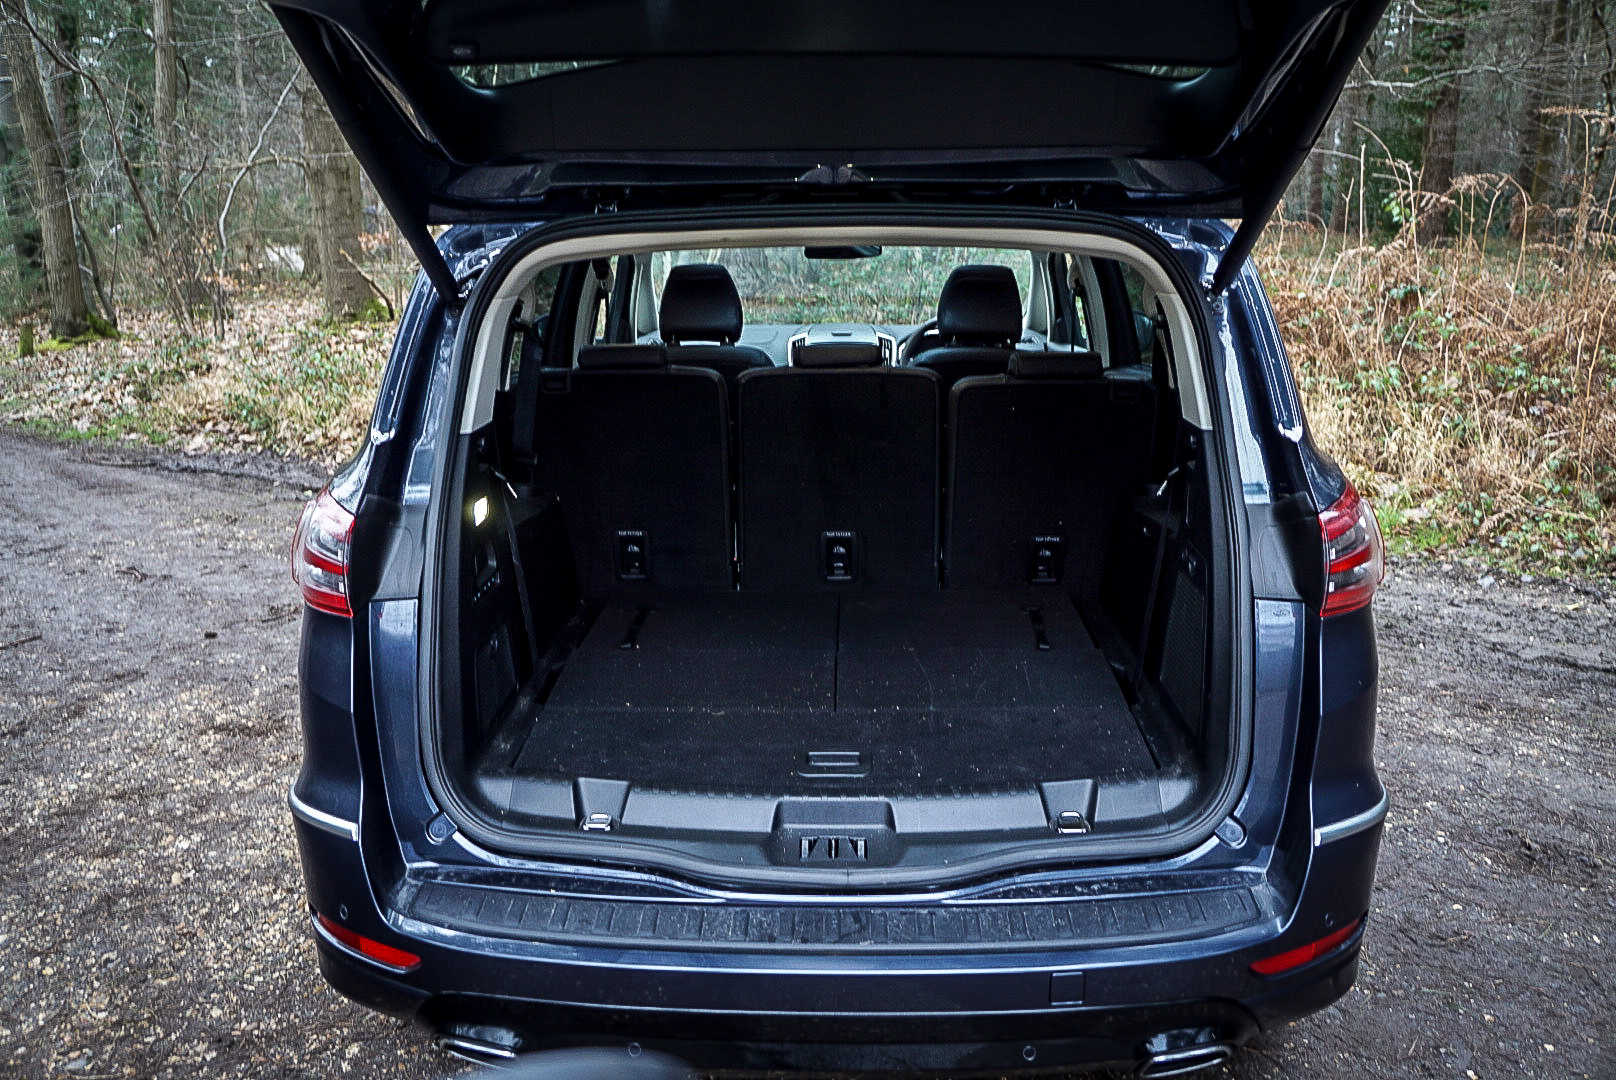 There's loads of boot space to use in the S-Max